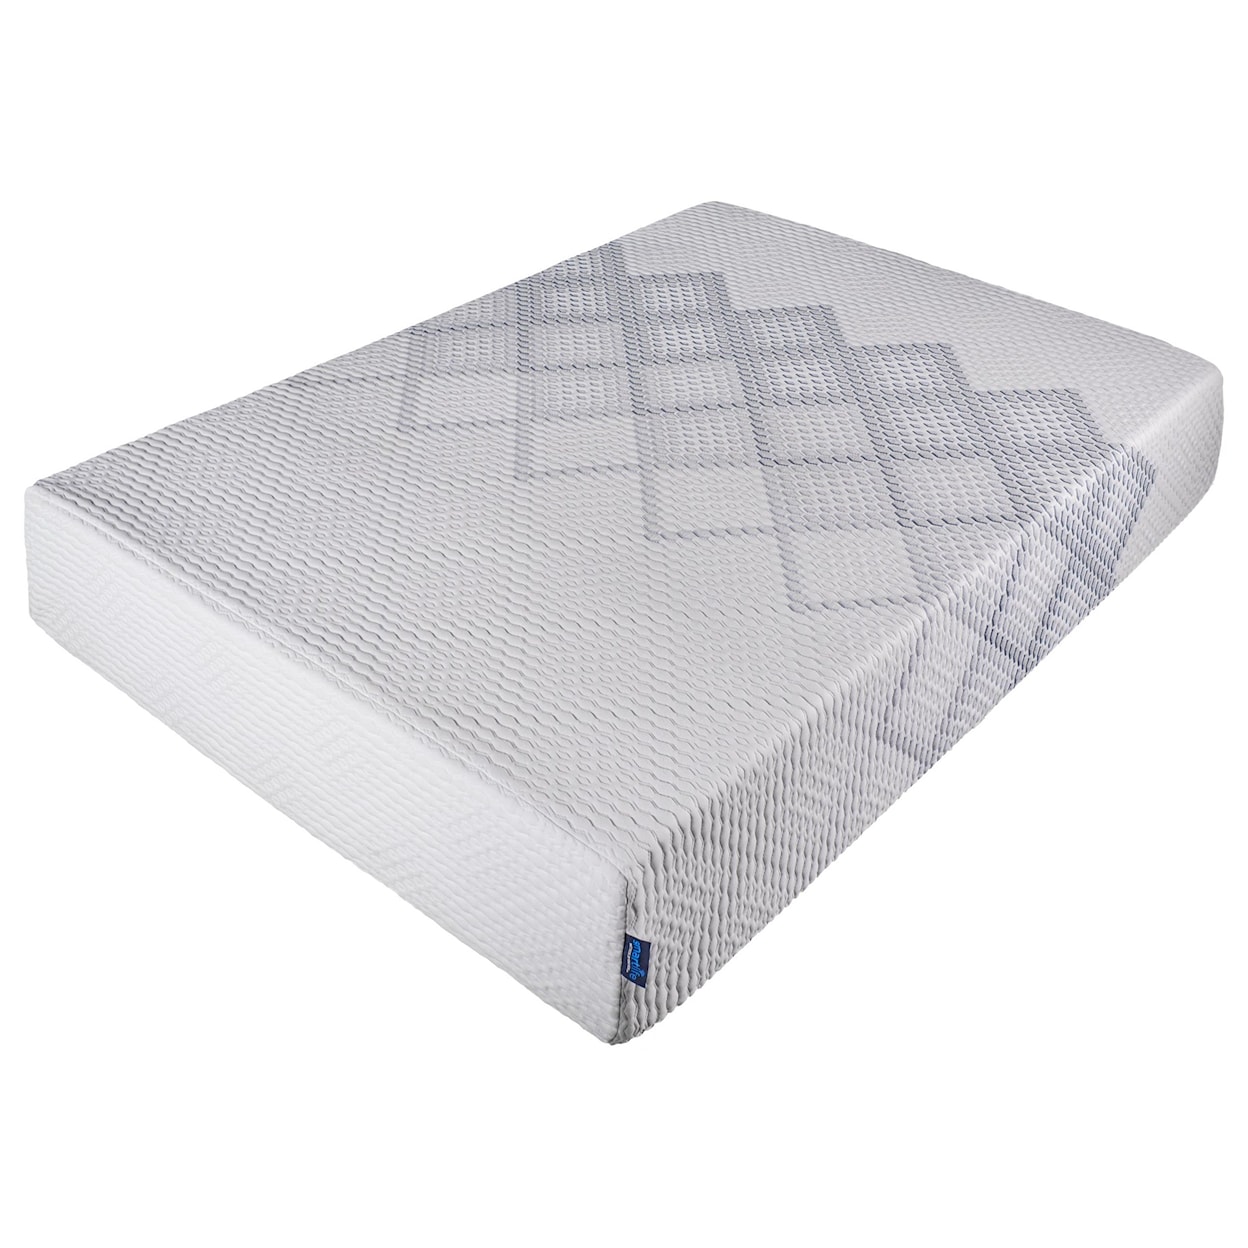 King Koil Lily Medium Mattress with Remote Lily Cal King Medium Mattress w/Remote